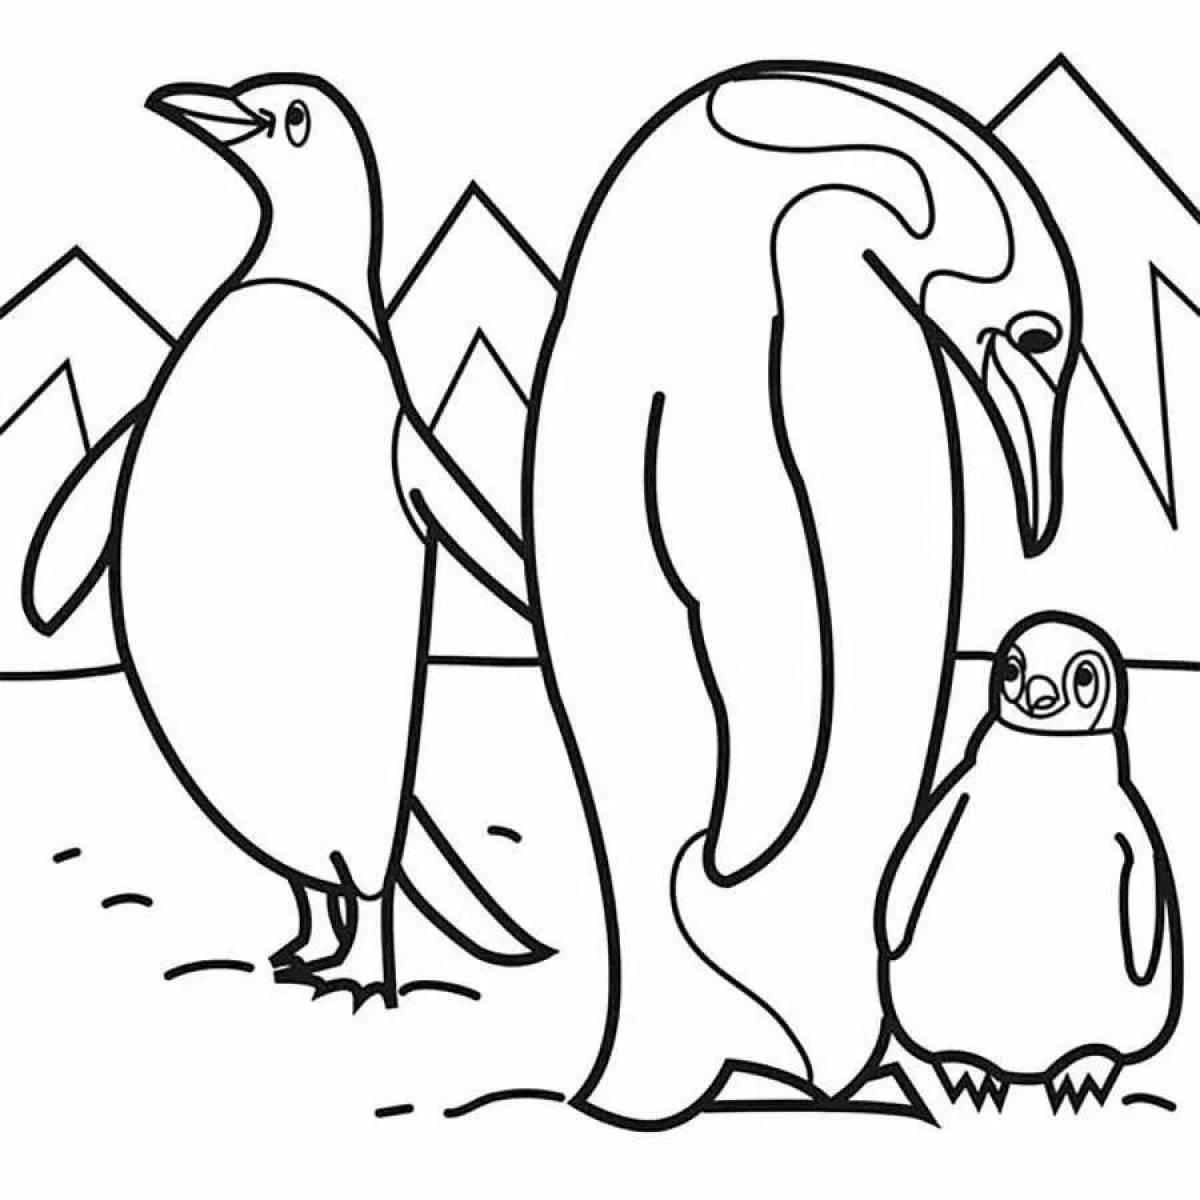 Wonderful northern animals coloring pages for kids